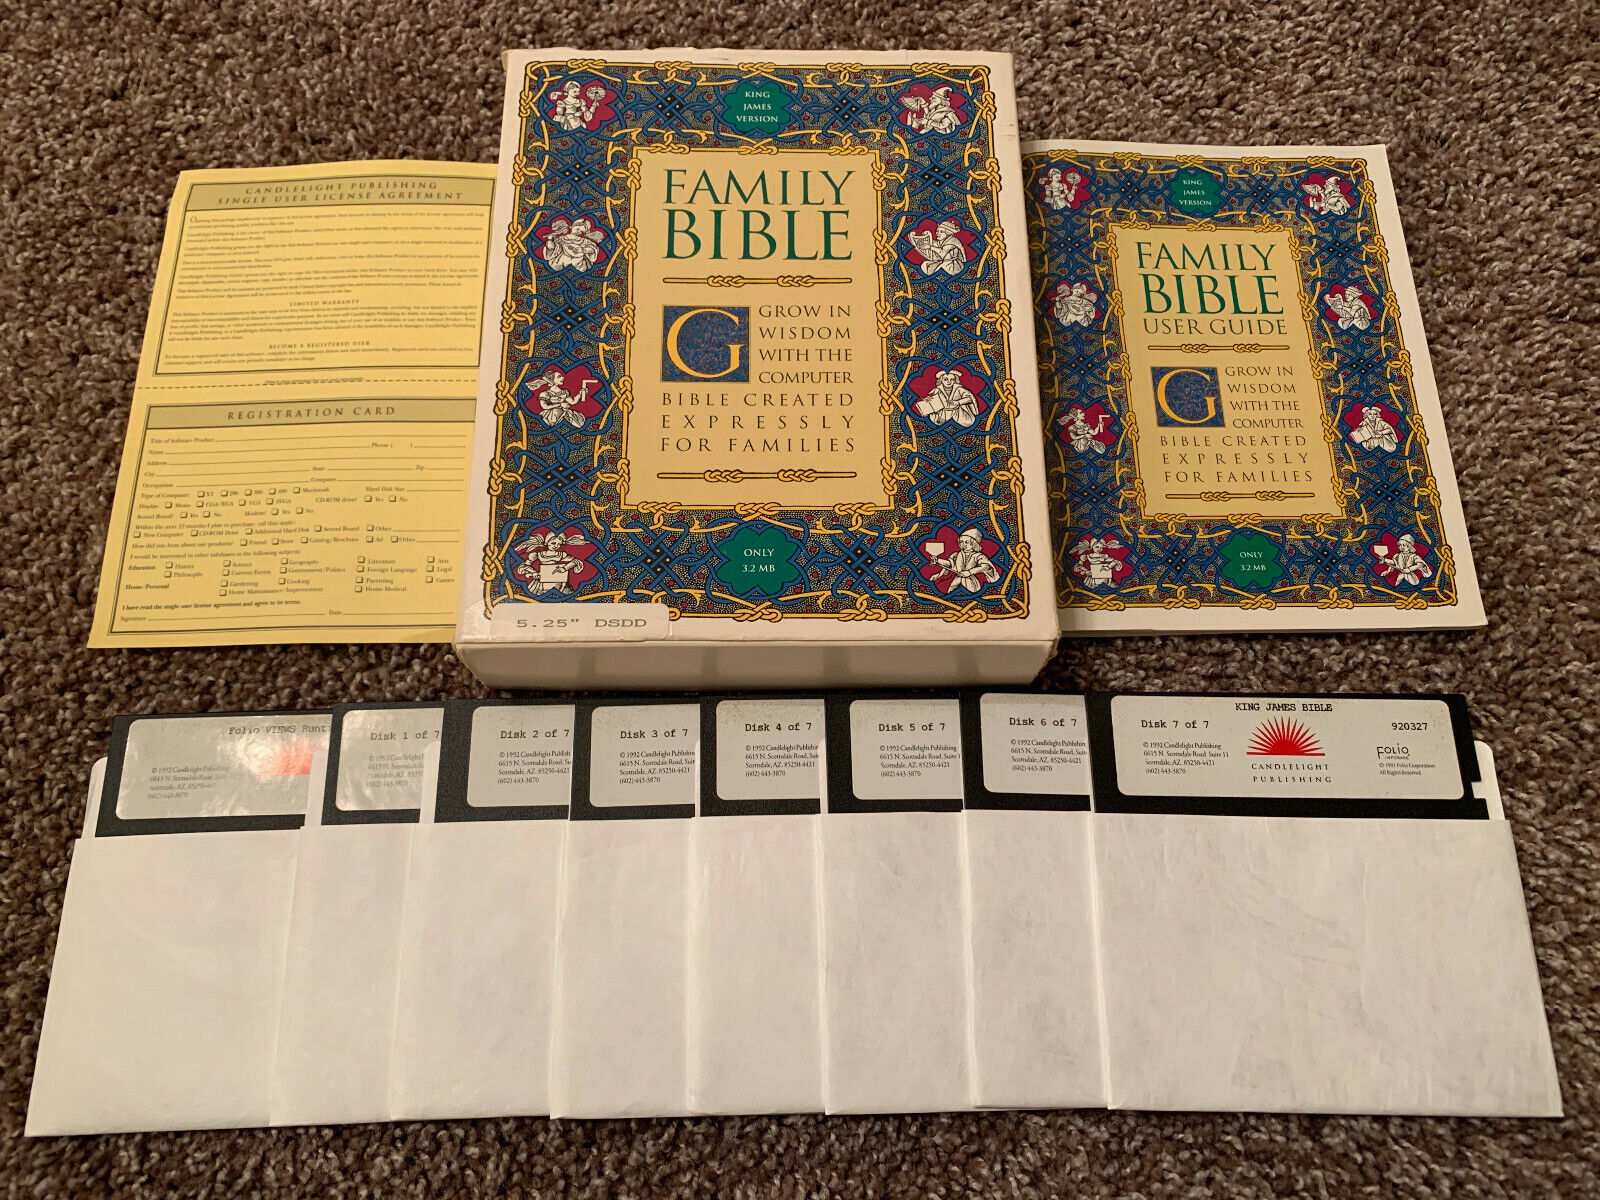 Family Bible - 1992 PC Computer King James Candlelight Software COMPLETE in Box